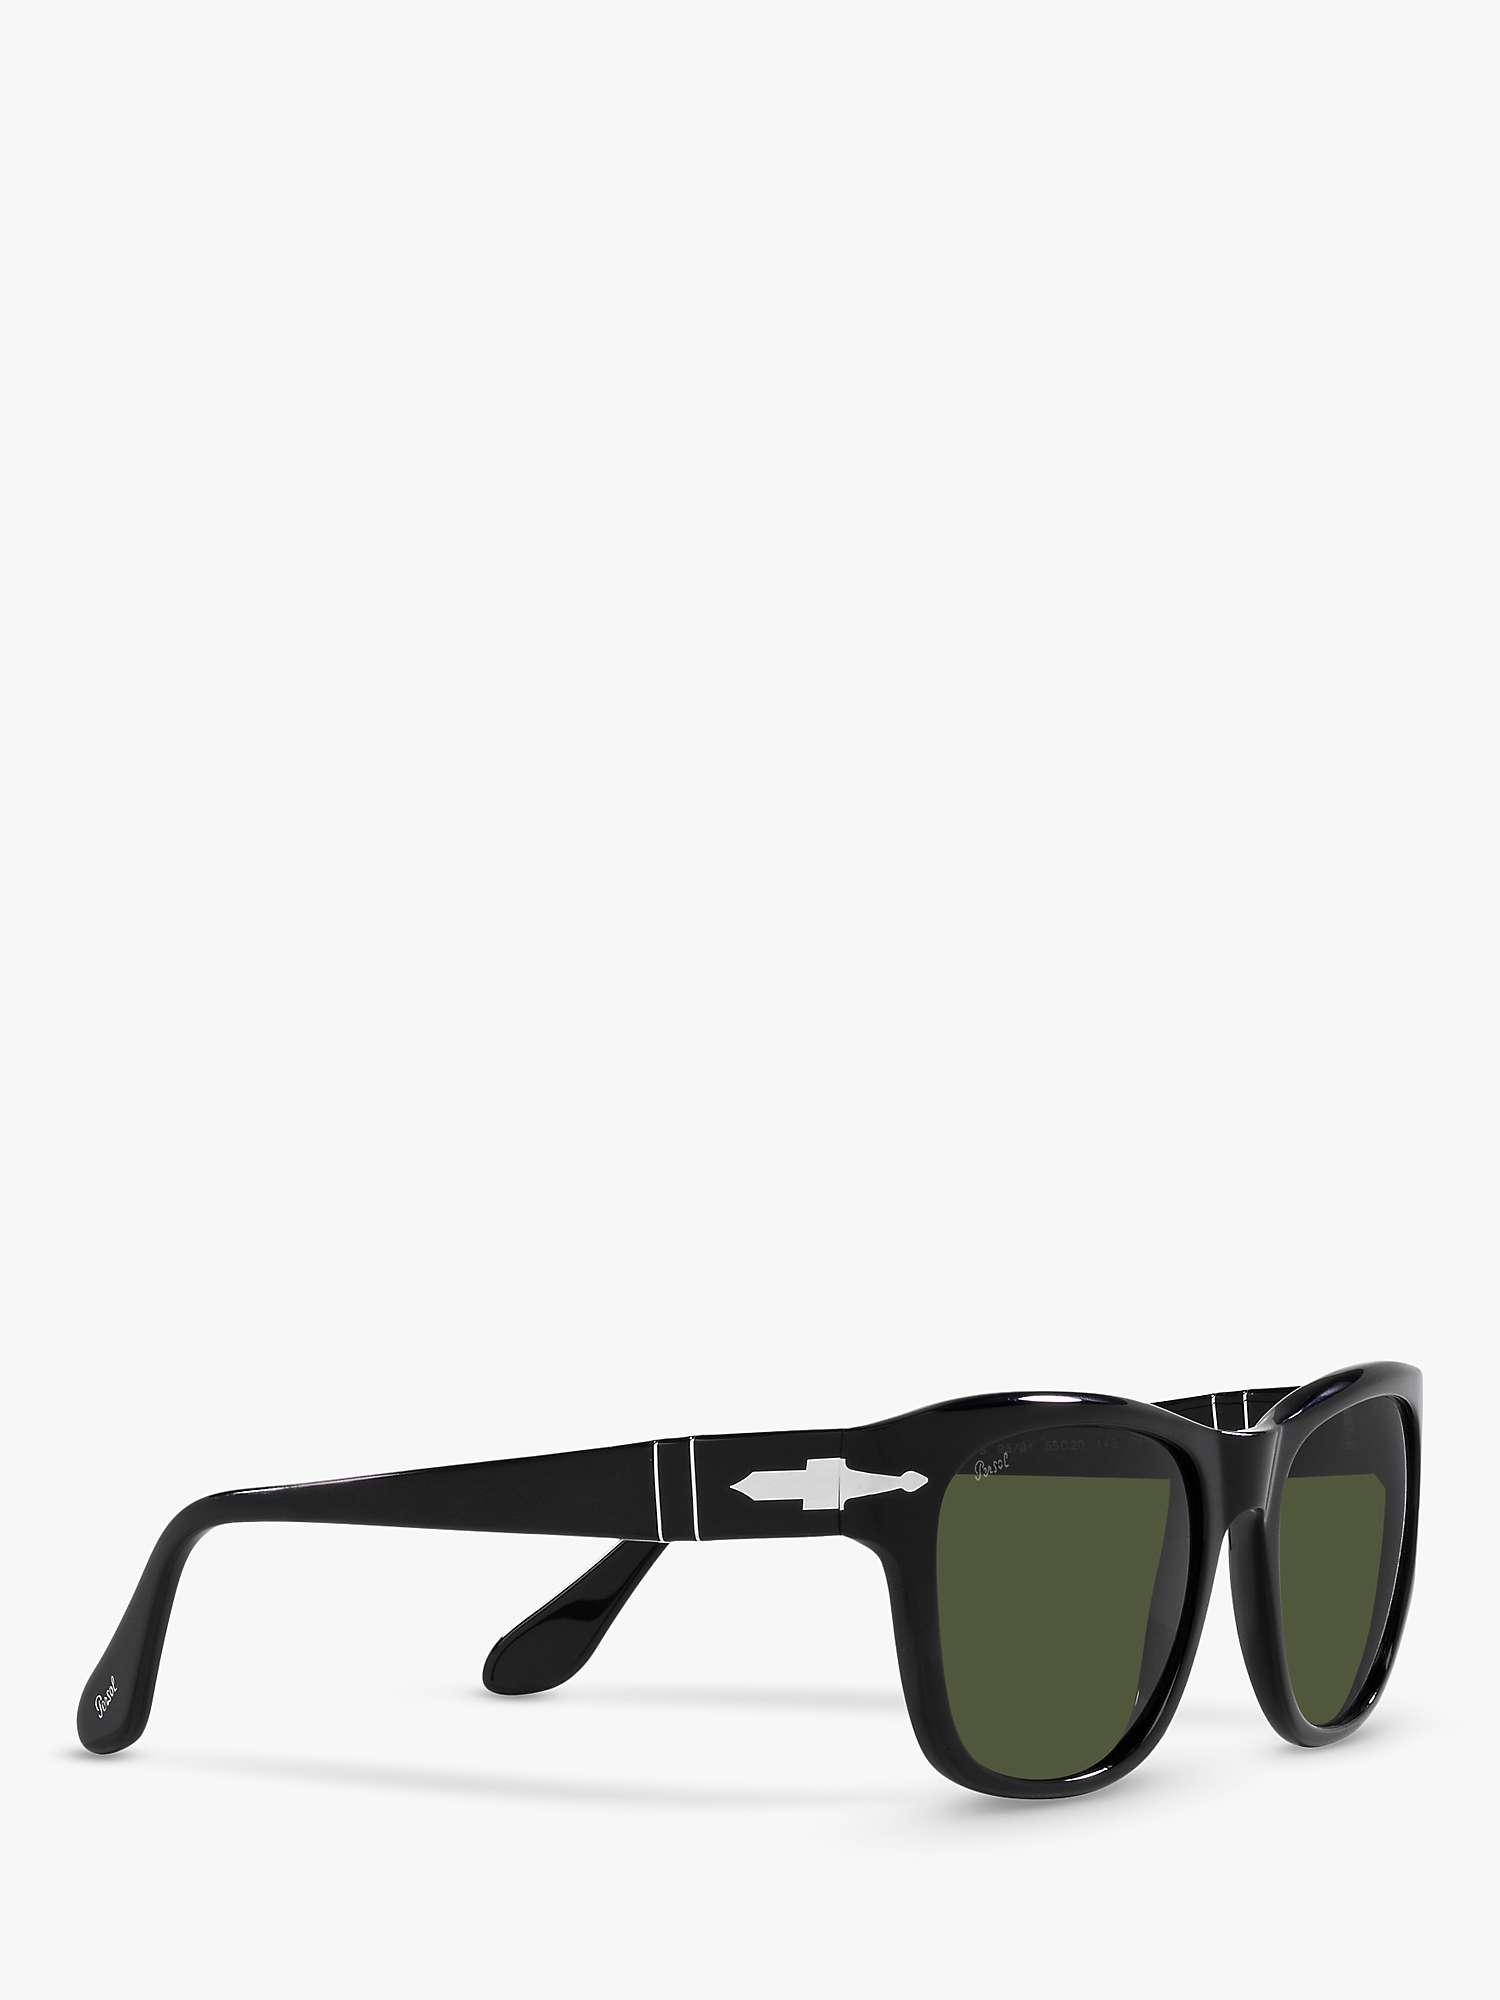 Buy Persol PO3313S Square Sunglasses, Black/Green Online at johnlewis.com